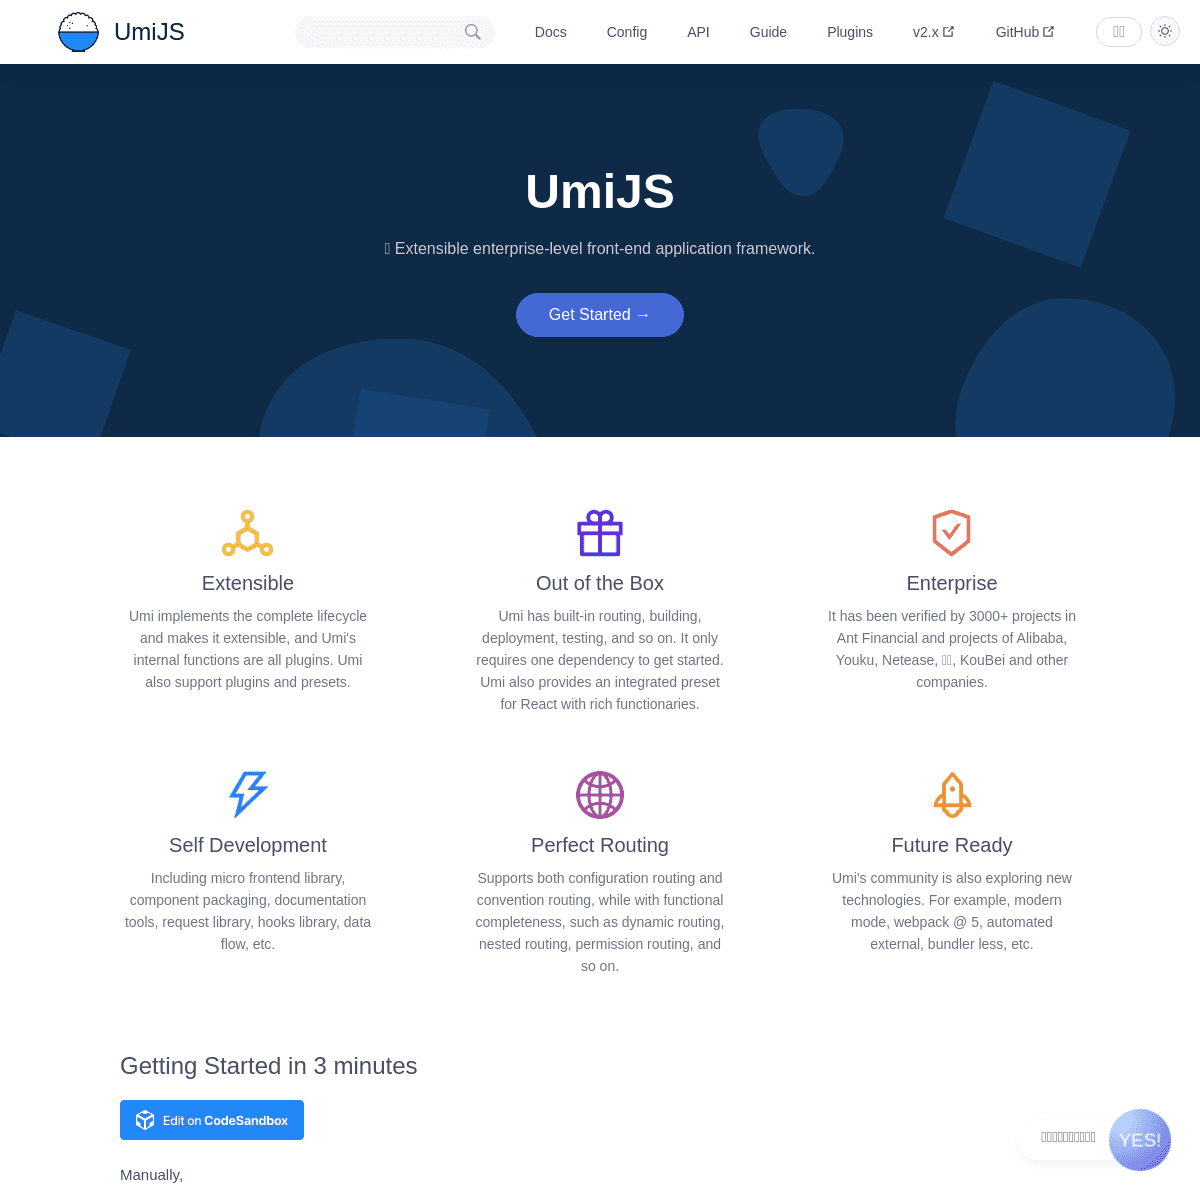 A complete backup of https://umijs.org